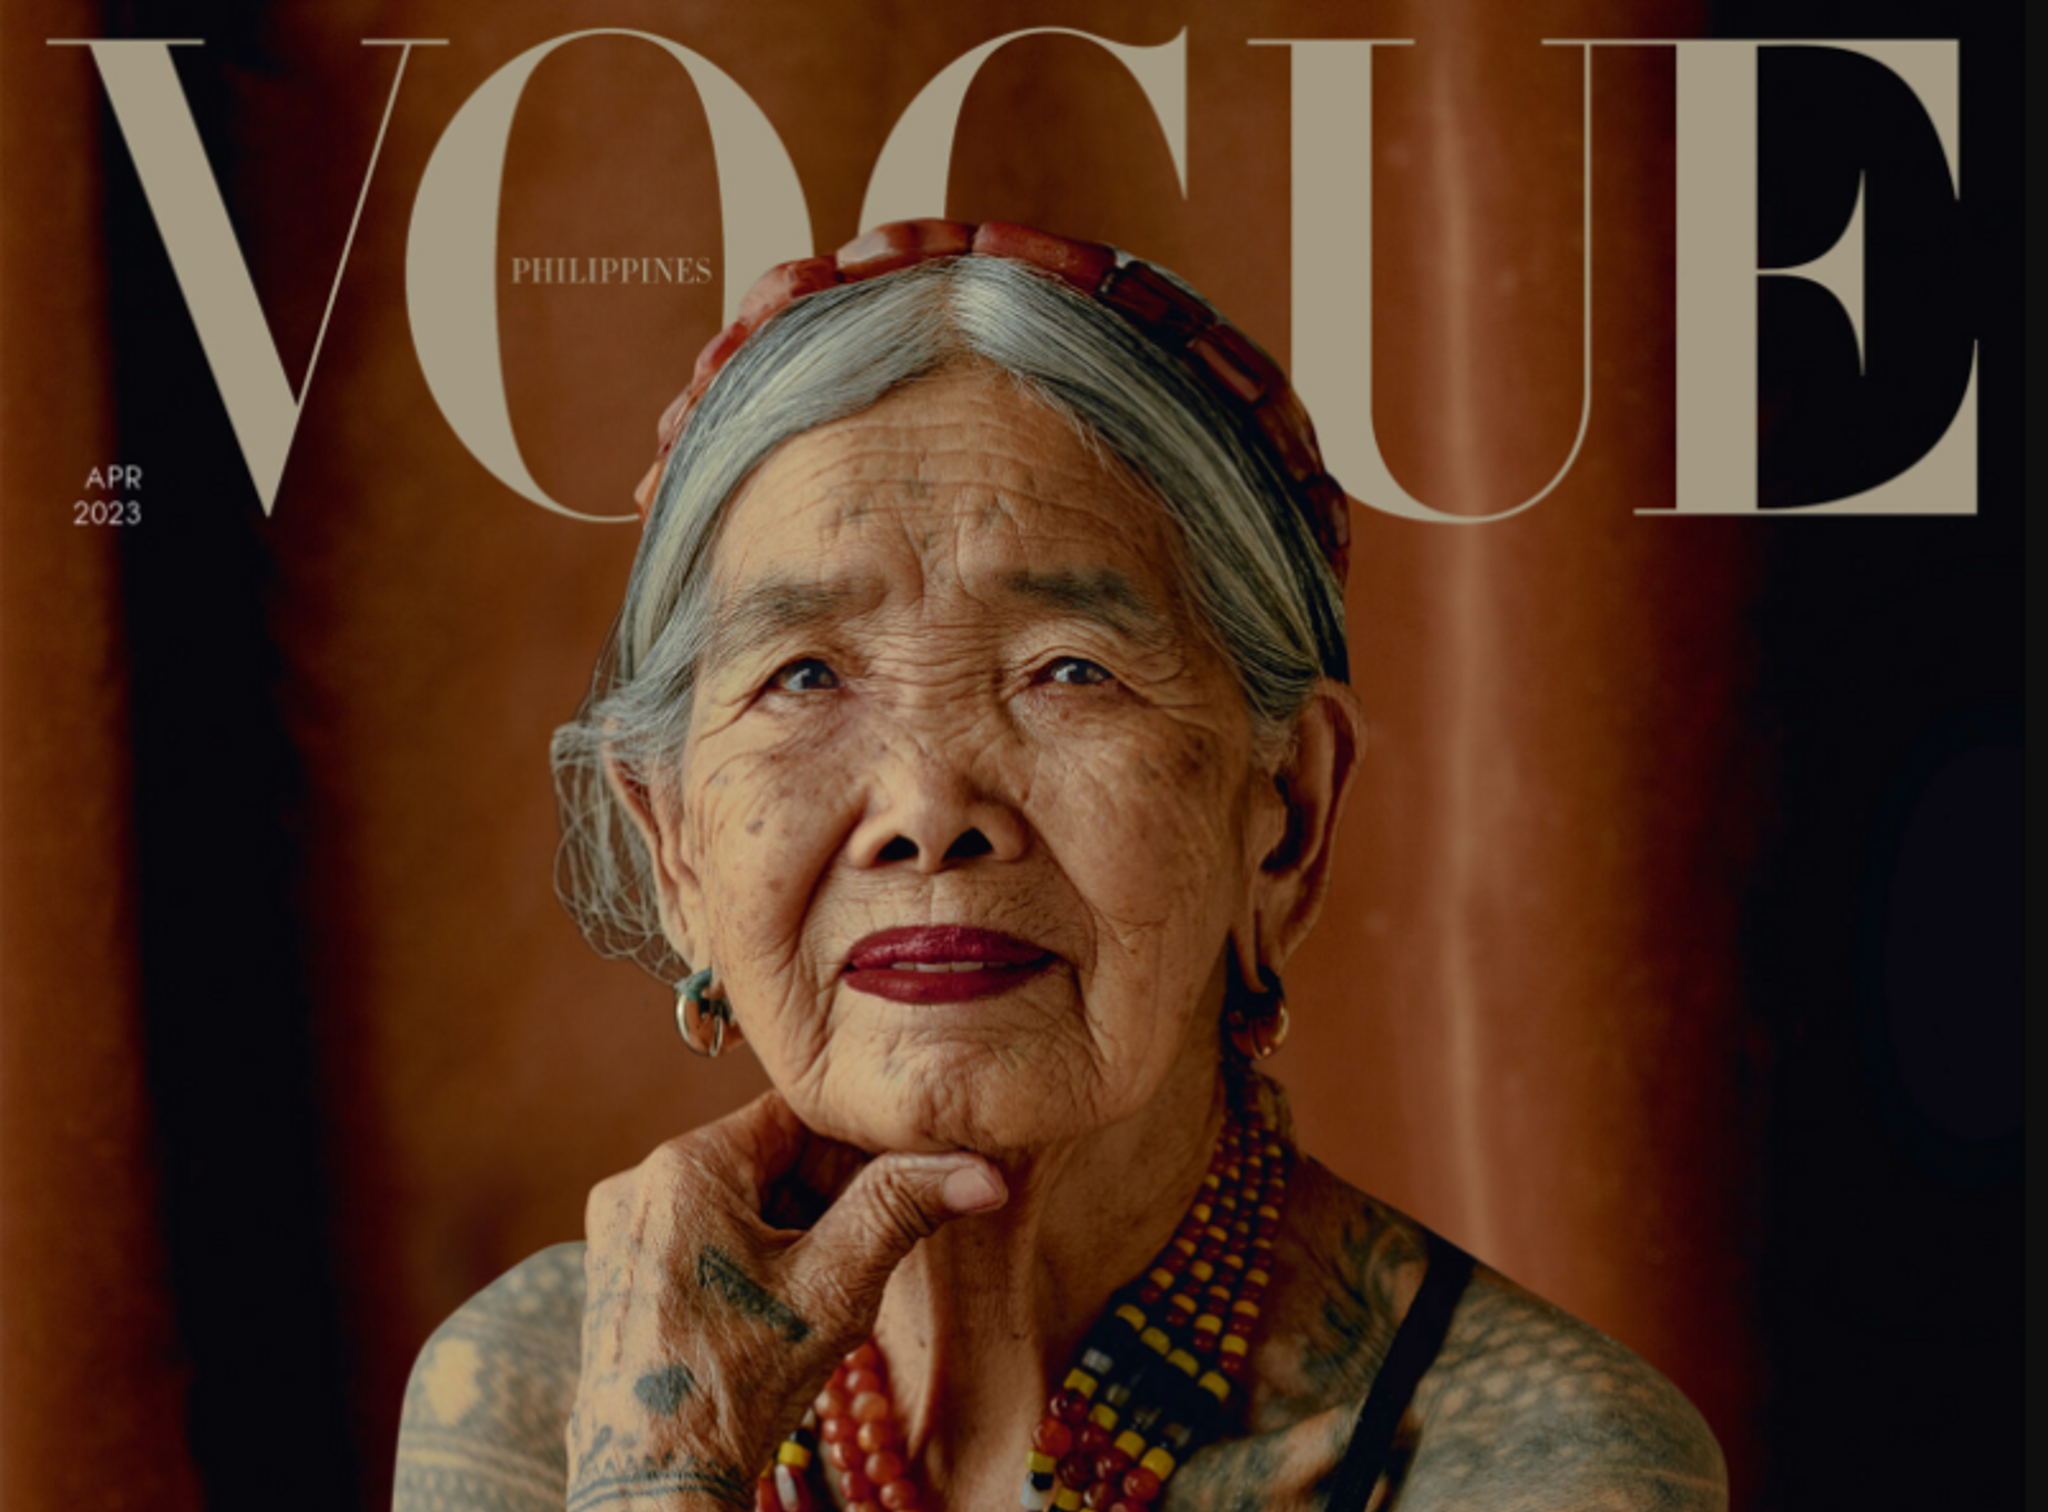 Vogue’s Apo Whang-Od cover champions intersectionality